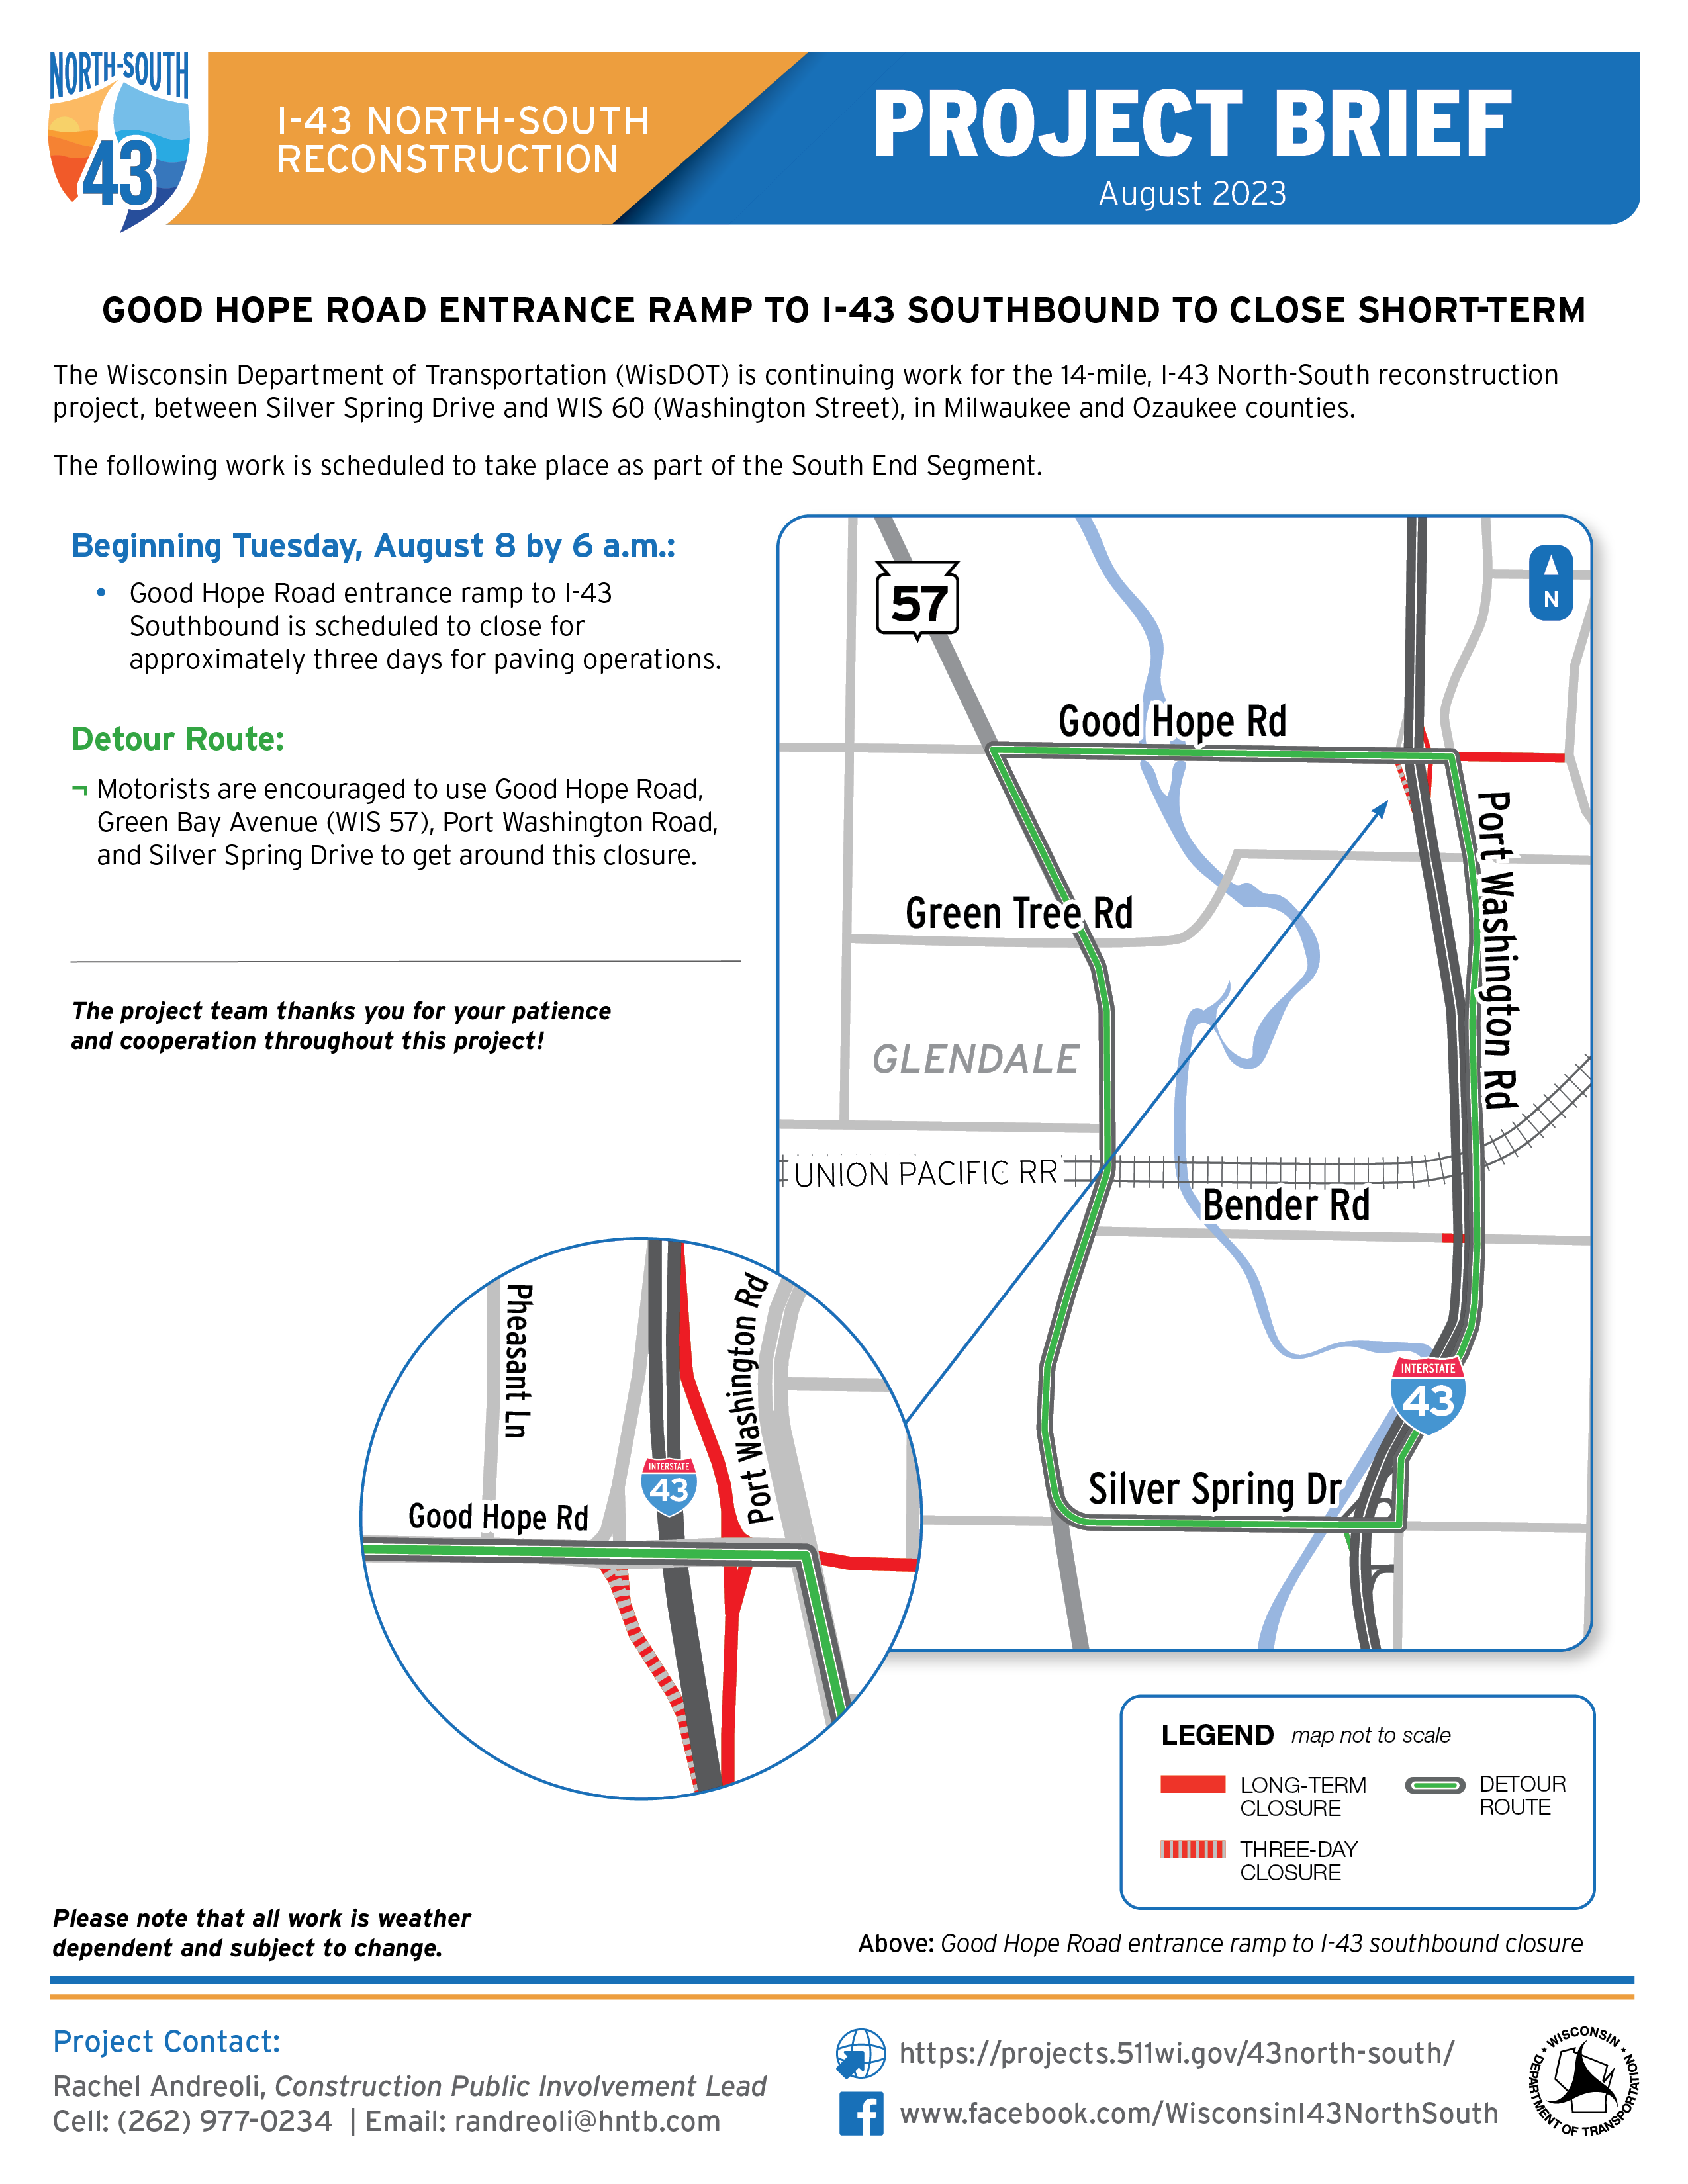 August 8, Good Hope Road Entrance Ramp to I-43 SB to Close Short-Term